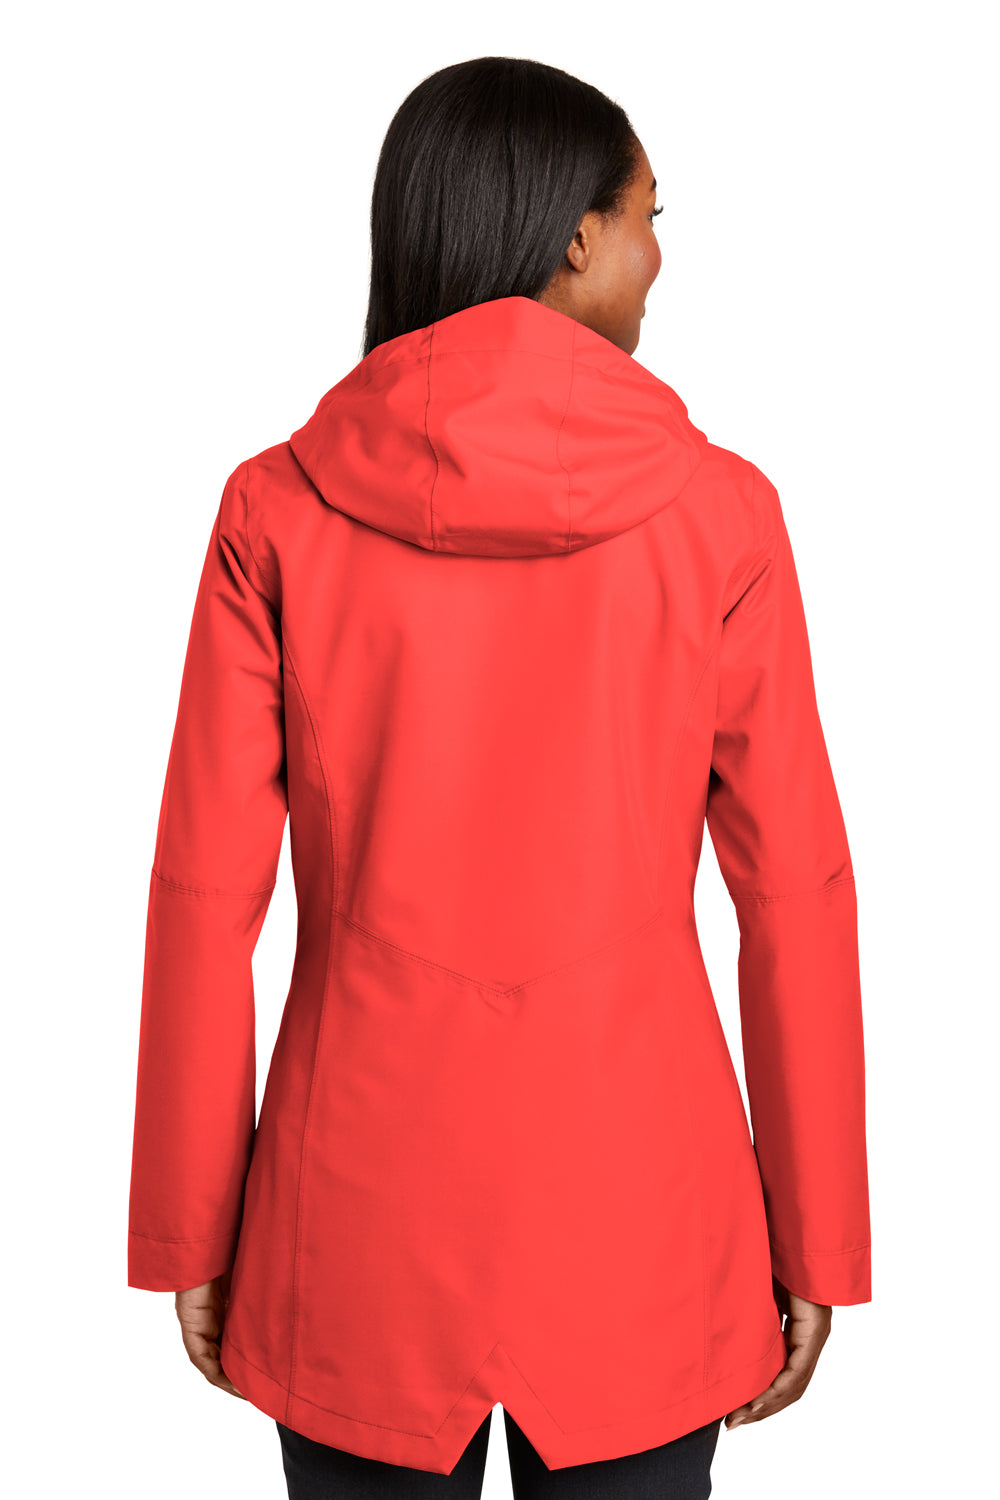 Port Authority L900 Womens Collective Waterproof Full Zip Hooded Jacket Pepper Red Back